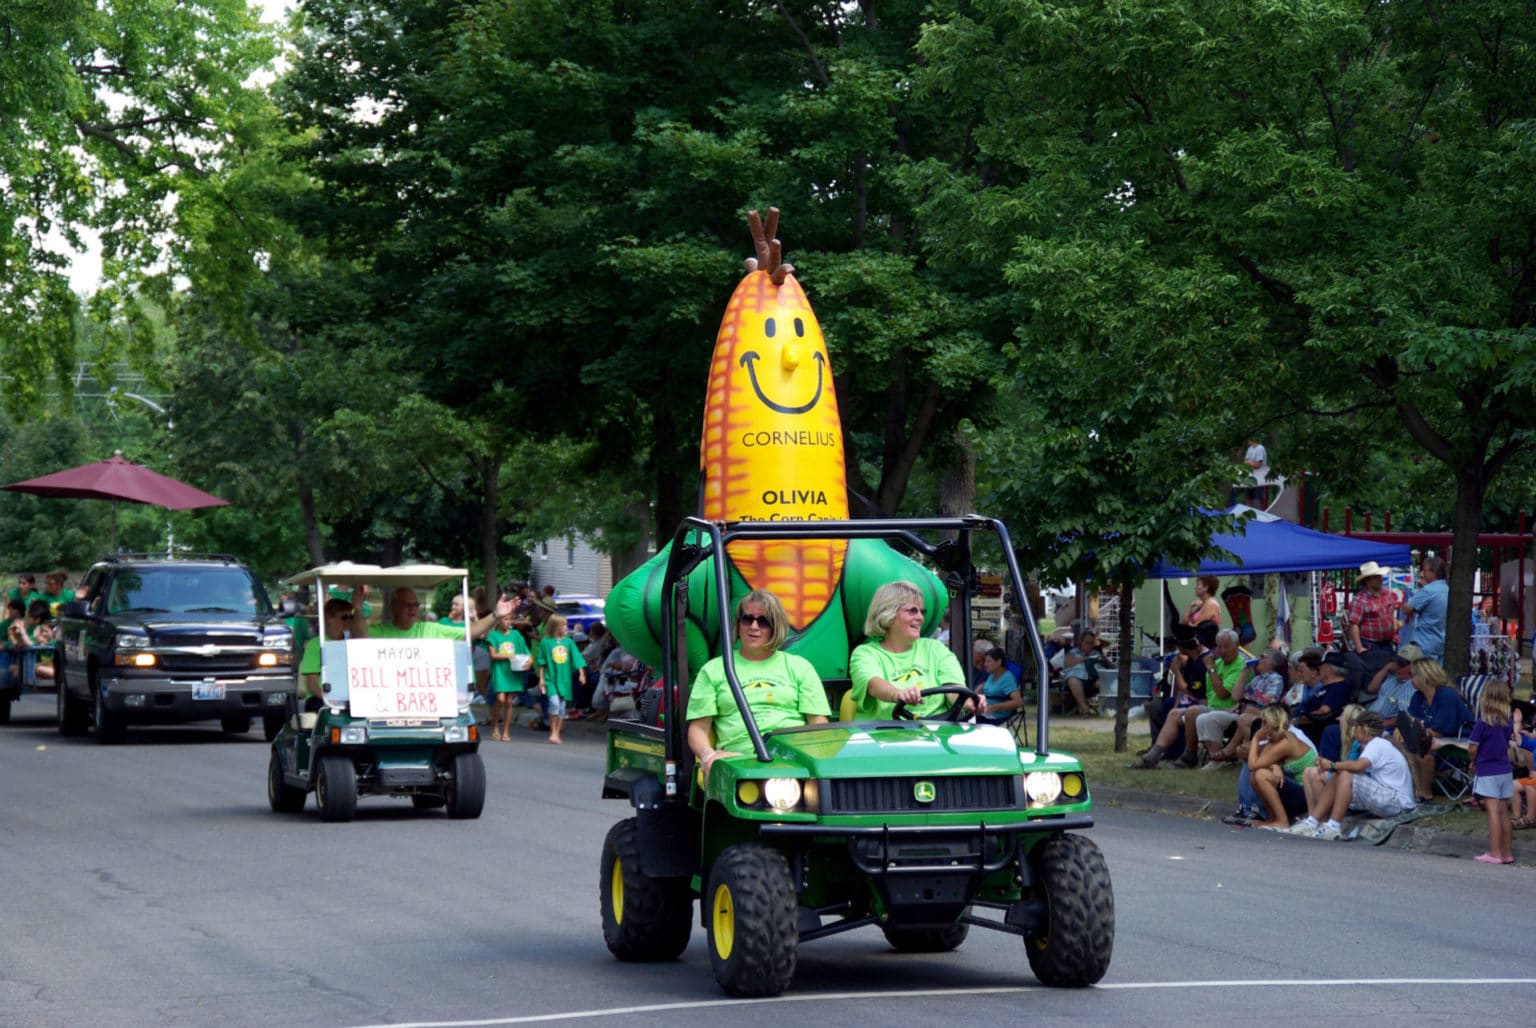 2023 Corn Capital Days Parade Route